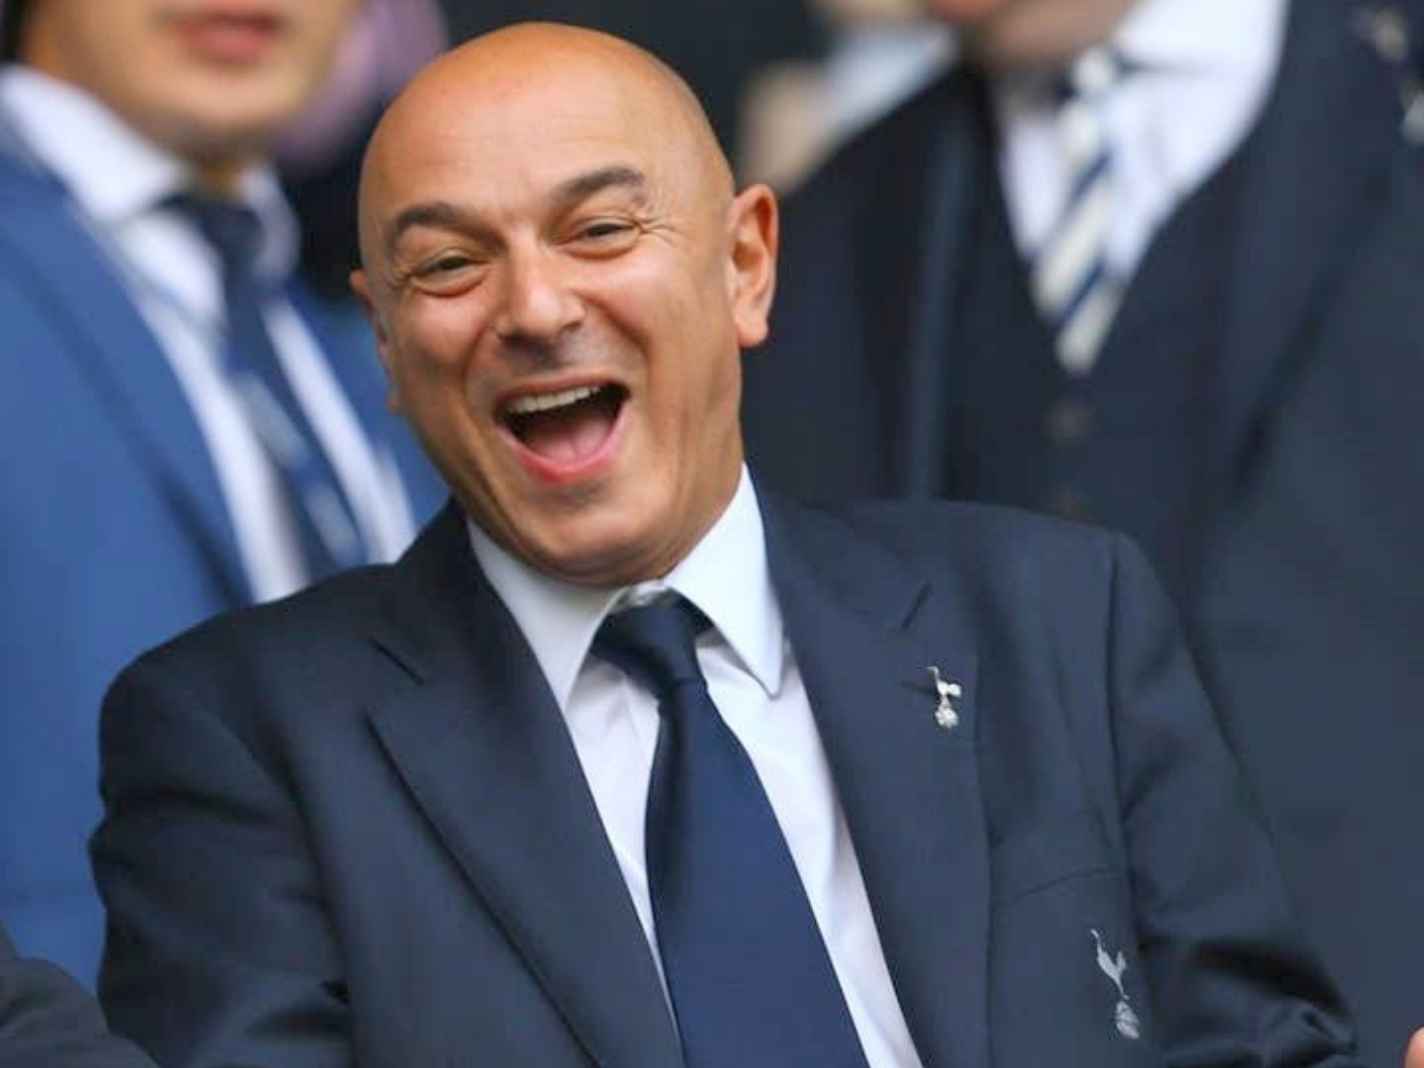 Rare photo of Tottenham chairman Daniel Levy with hair has fans shocked